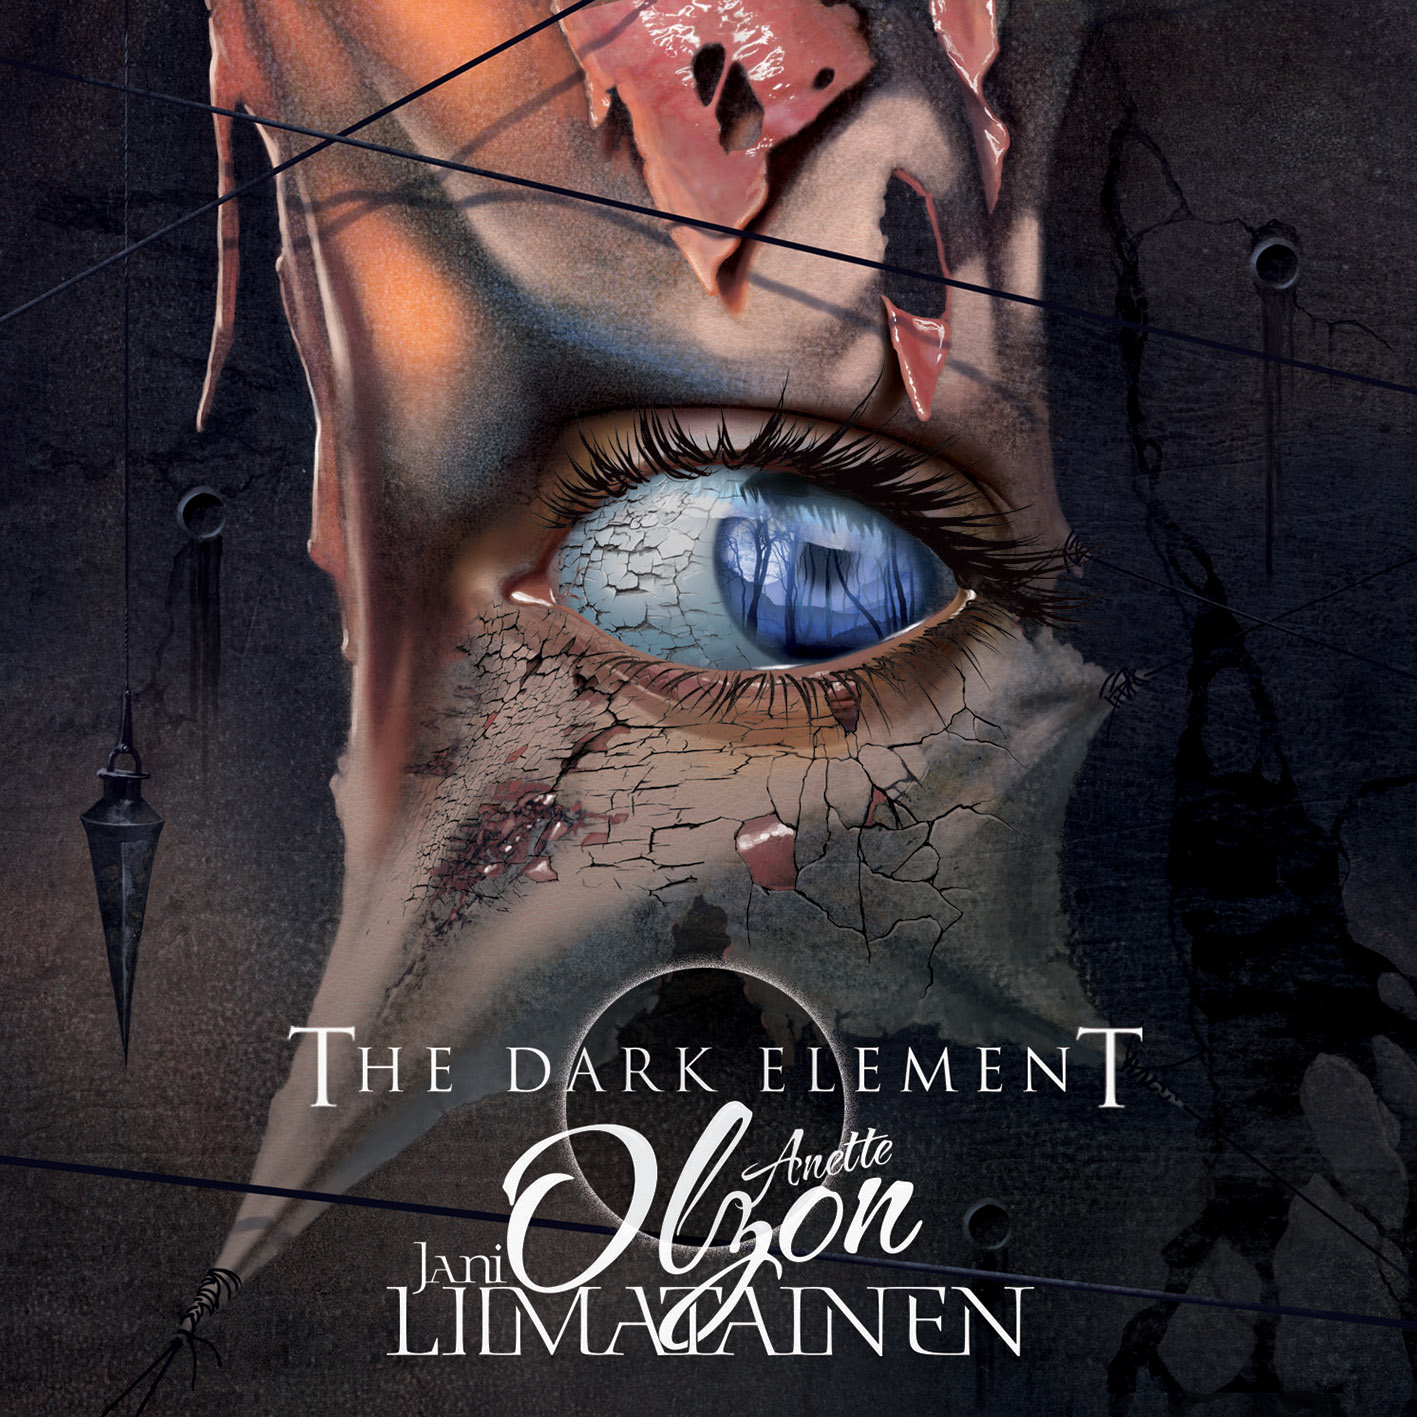 The Dark Element - The Dark Element (Feat. Anette Olzon and Jani Liimatainen)